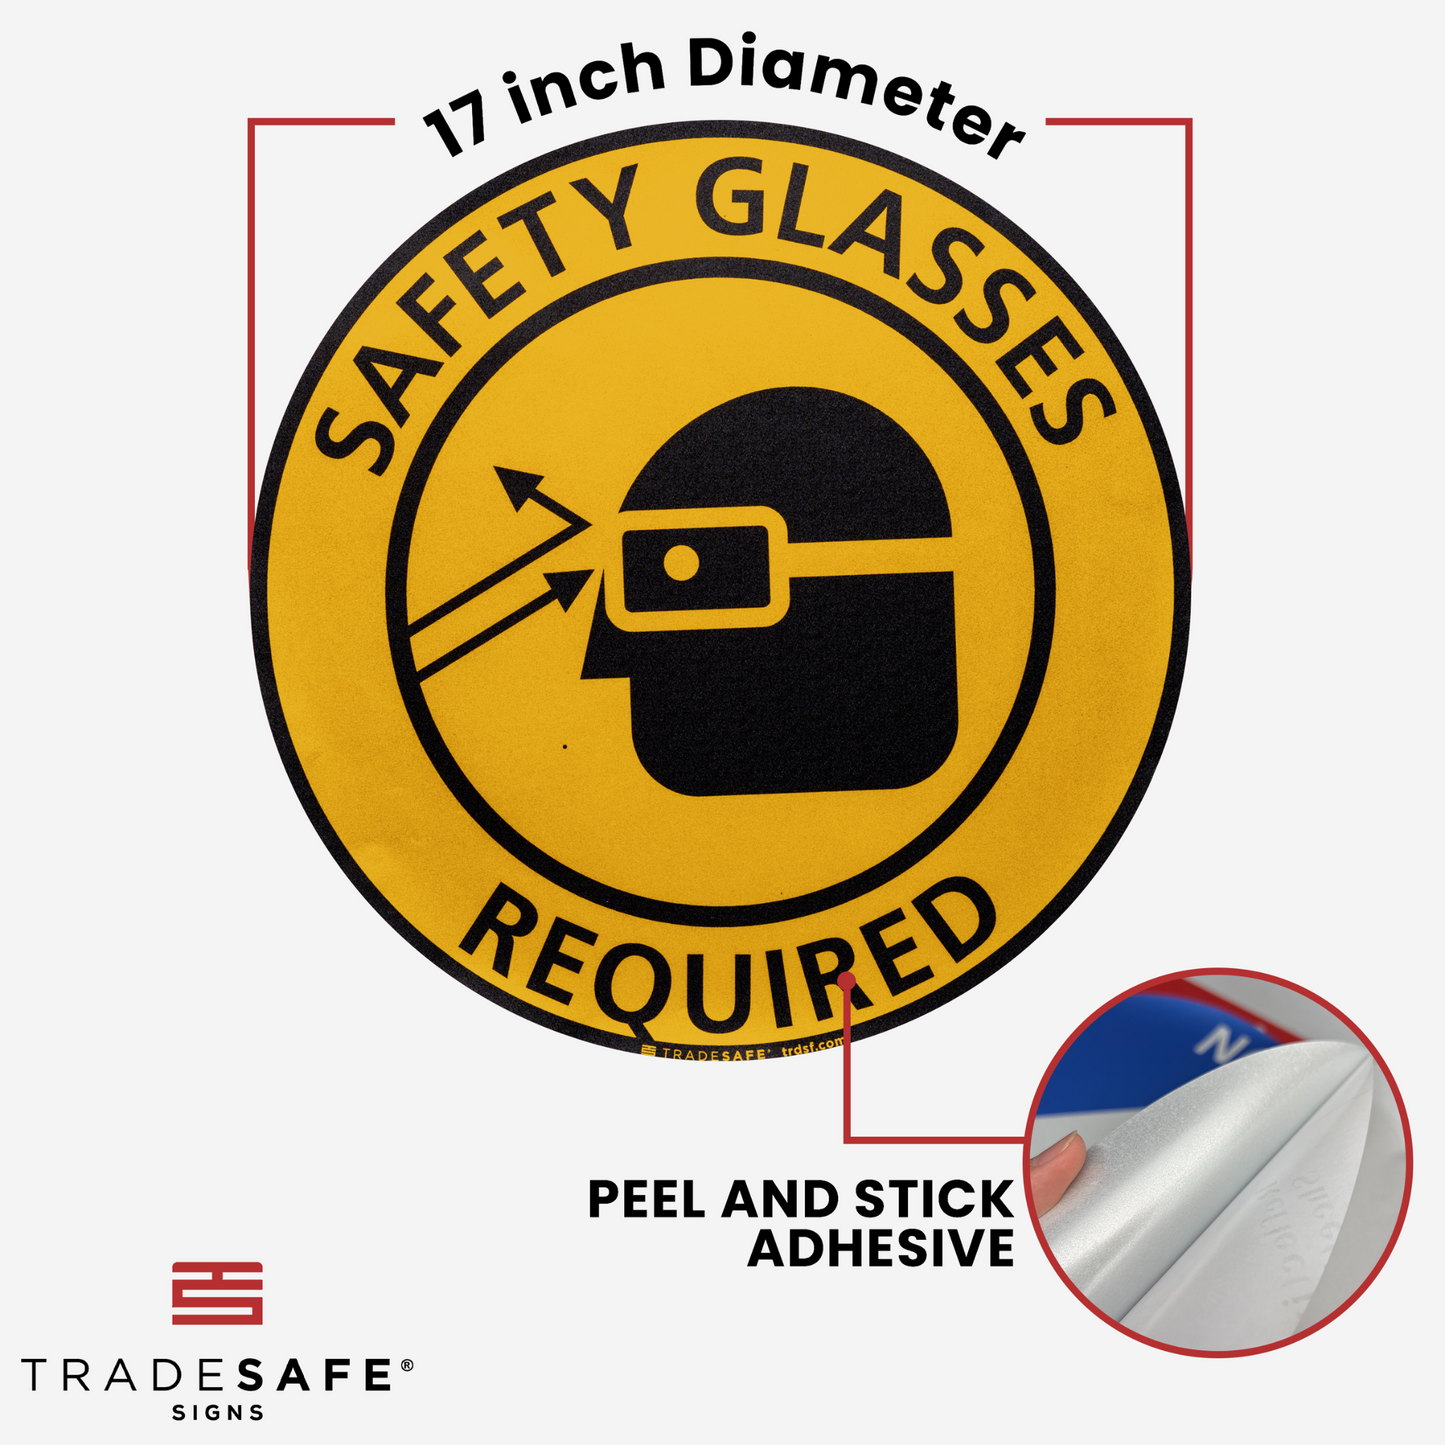 dimensions of safety glasses required sign 